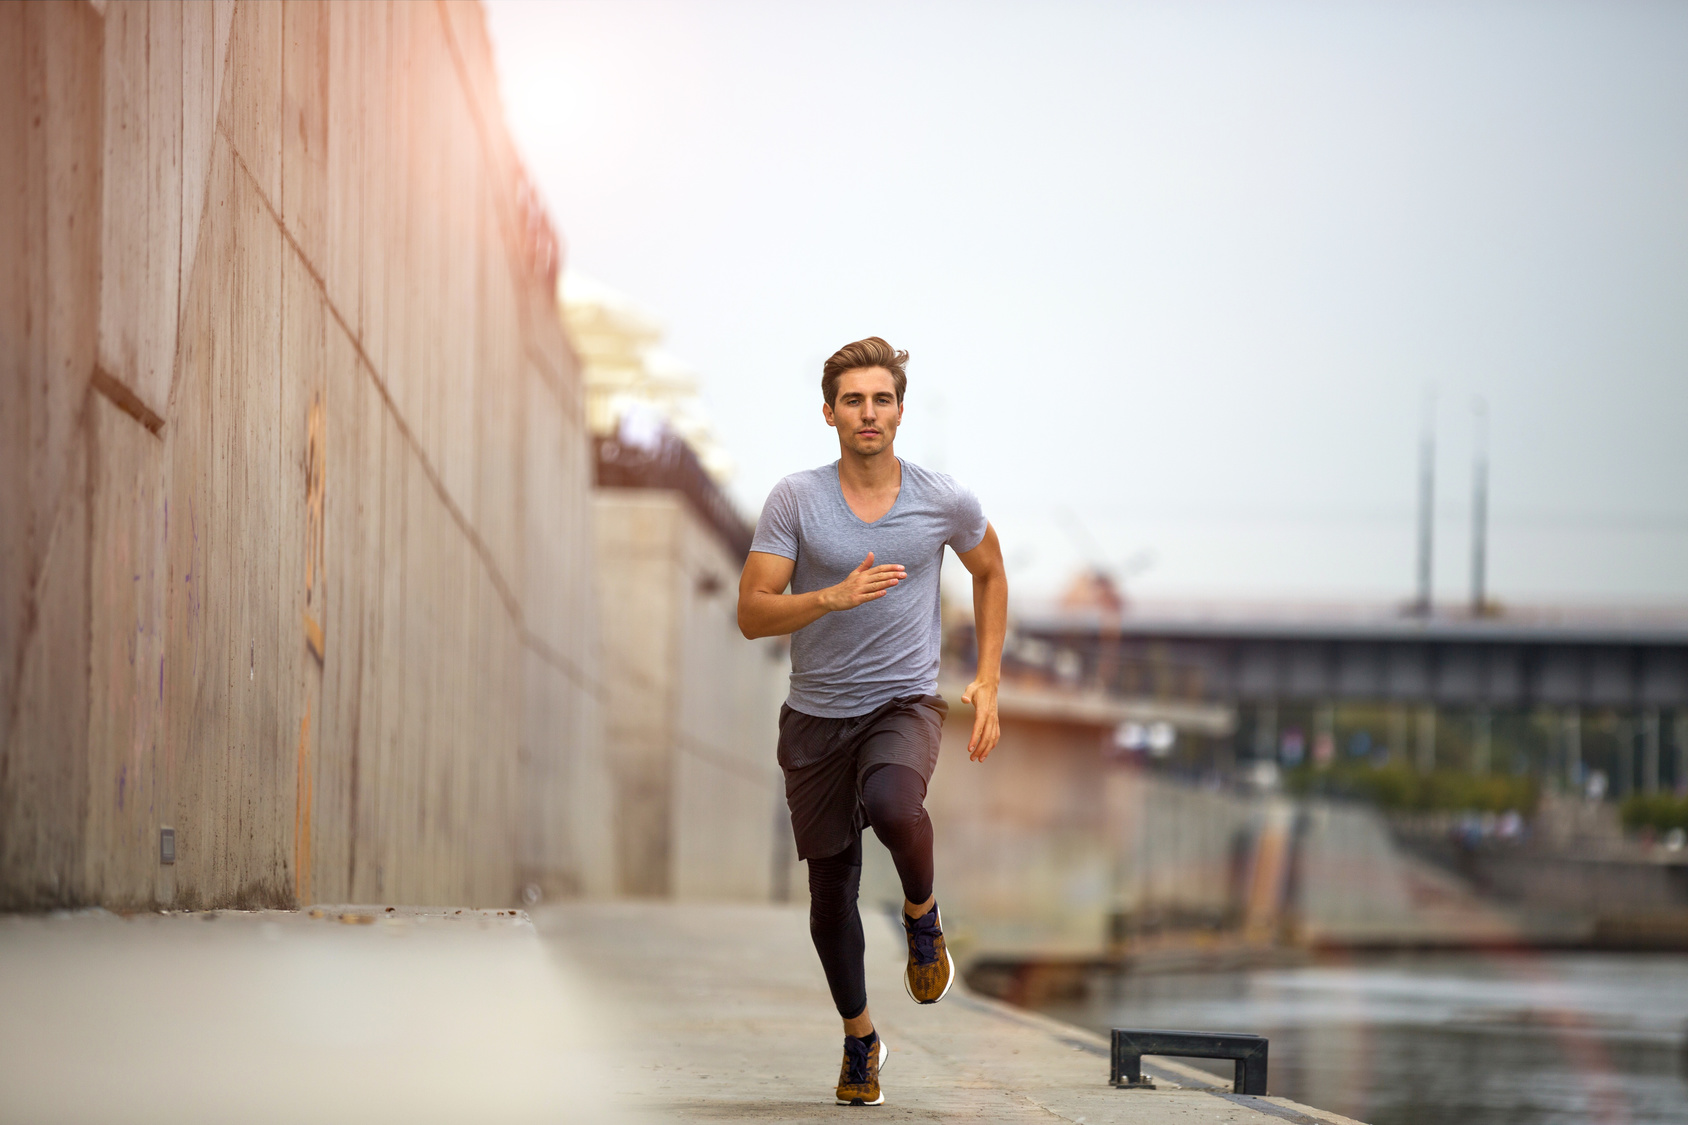 Fueling Endurance: How to Optimize Marathon Training with the Keto Diet